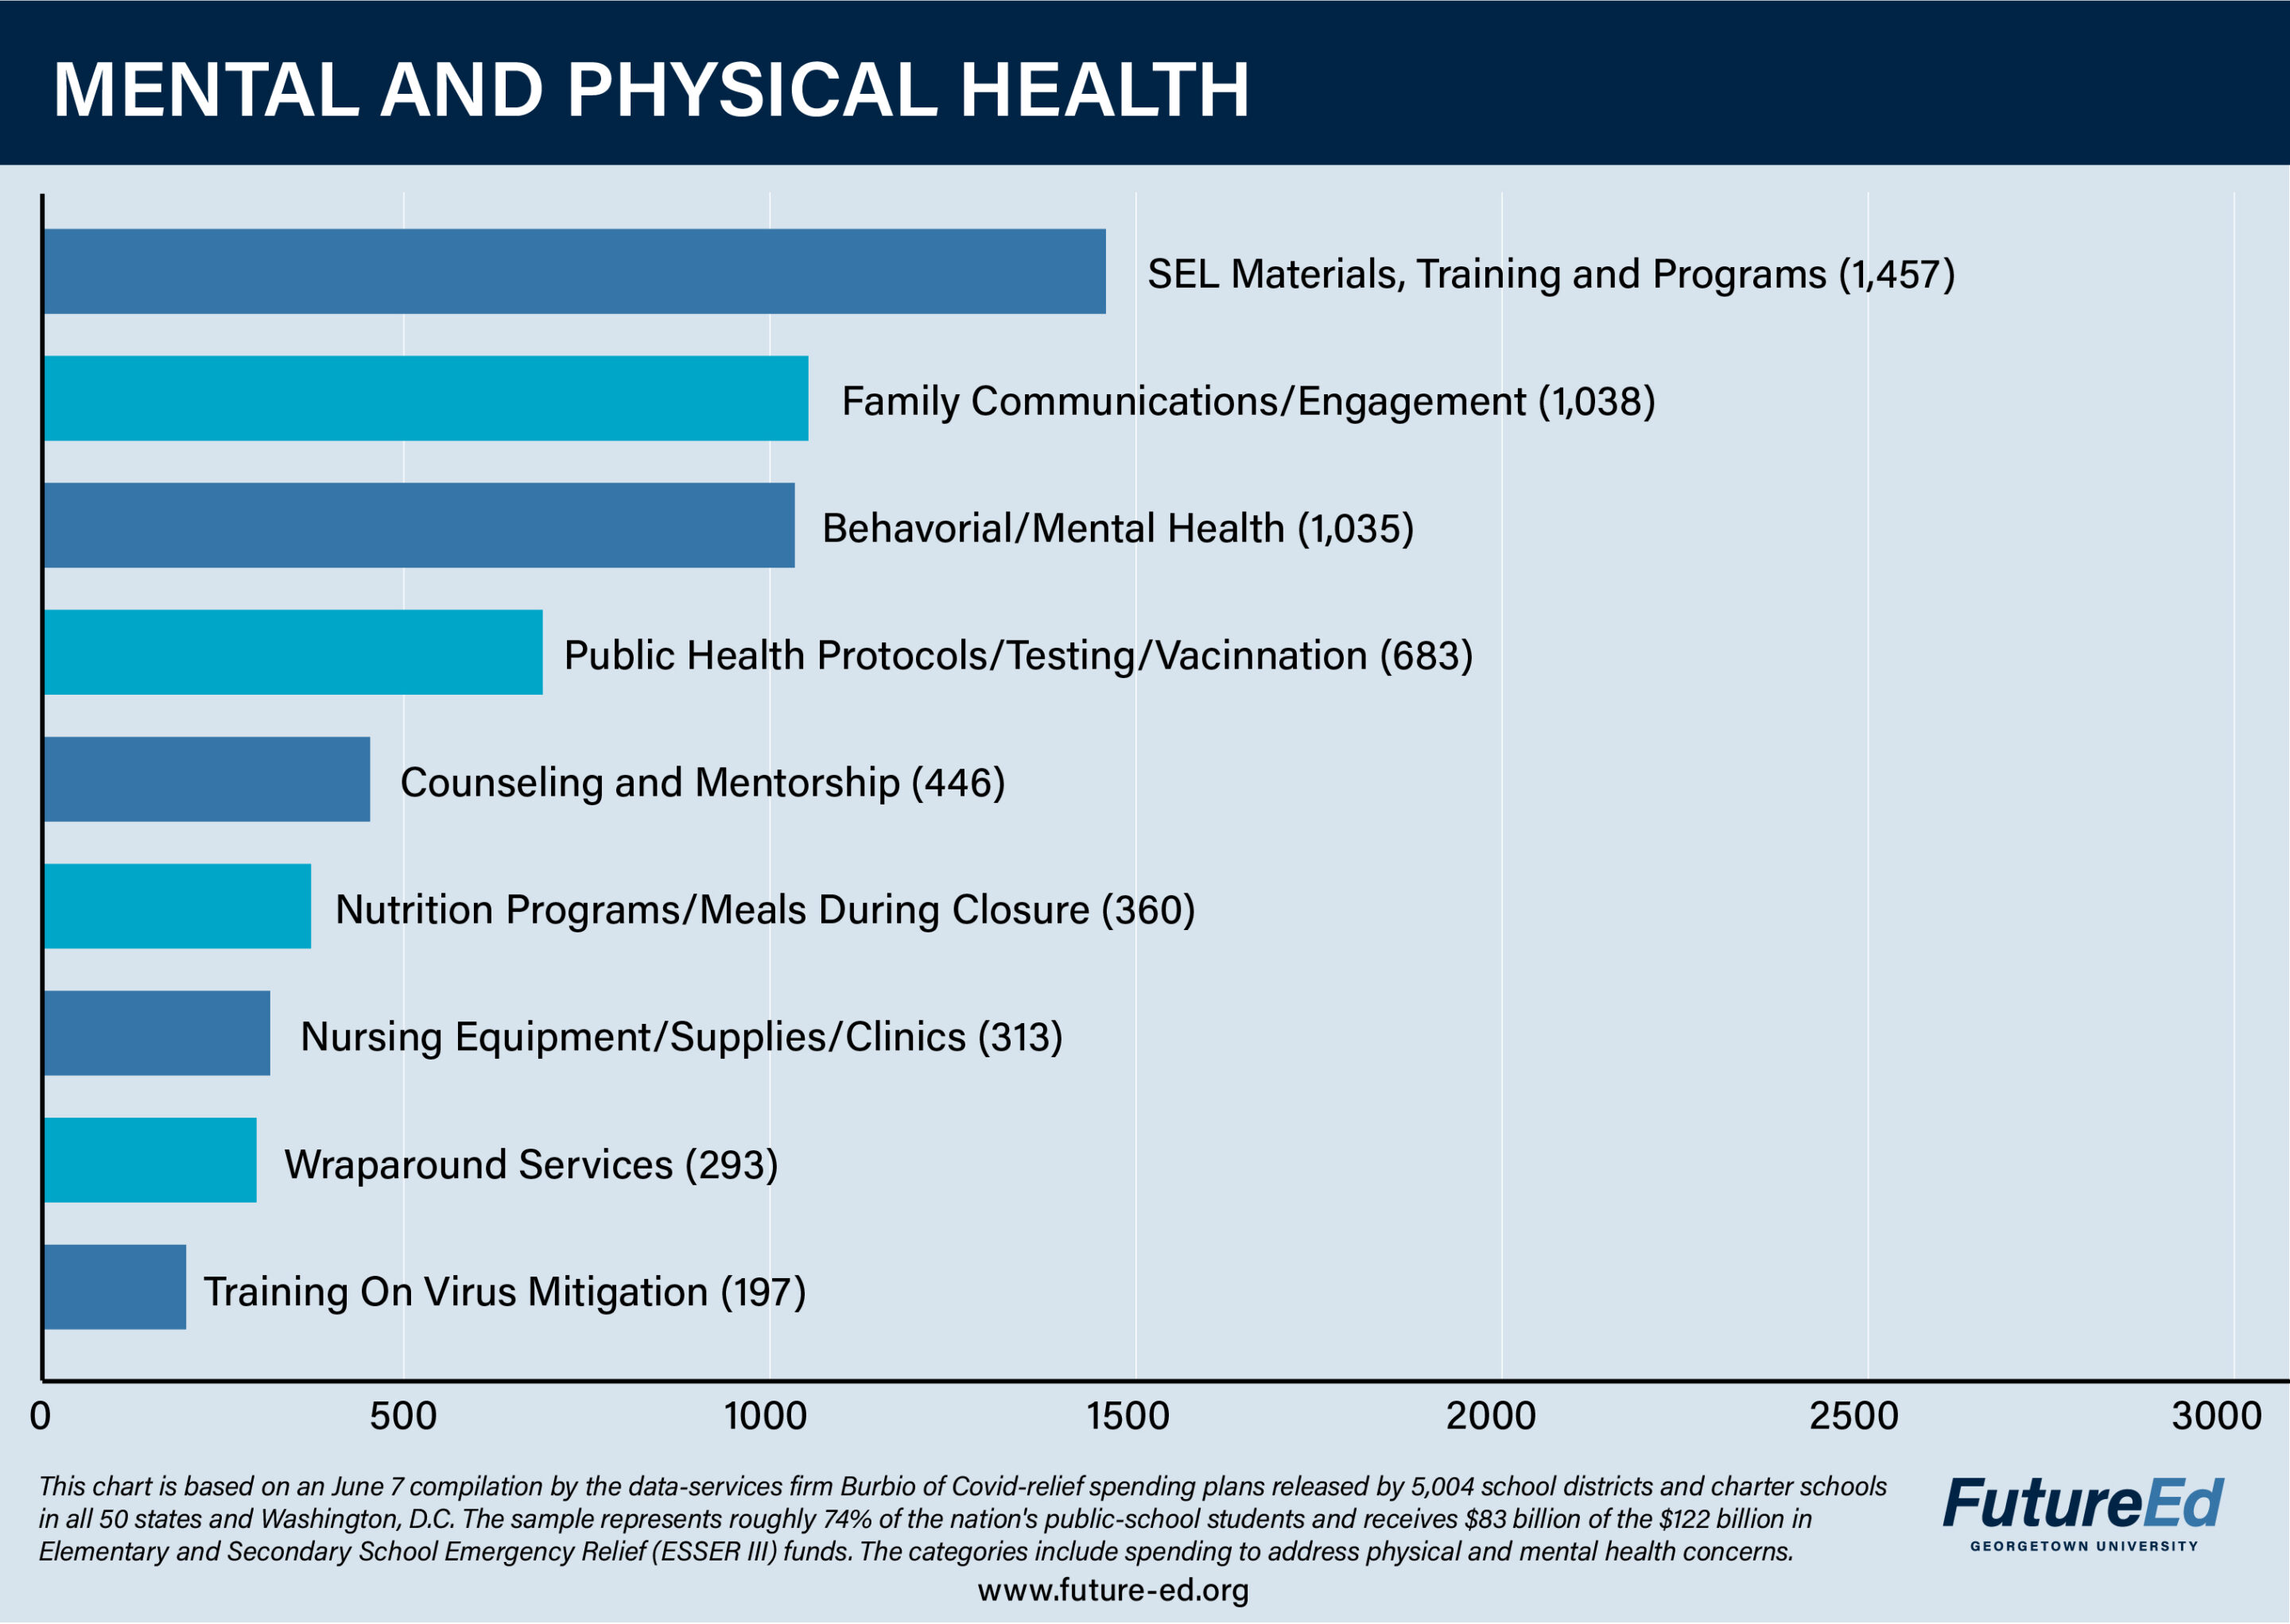 Chart: Mental and Physical Health. SEL materials, training and programs: 1,457. Family communications/engagement: 1,038. Behavioral/mental health: 1,035. Public health protocols/testing/vaccination: 683. Counseling and mentorship: 446. Nutrition programs/meals during closure: 360. Nursing equipment/supplies/clinics: 313. Wraparound services: 293. Training on virus mitigation: 197. (This chart is based on a June 7 compilation by the data-services firm Burbio of Covid-relief spending plans released by 5,004 school districts and charter schools in all 50 states and Washington, D.C. The sample represents roughly 74% of the nation's public-school students and receives $83 billion of the $122 billion in Elementary and Secondary School Emergency Relief (ESSER III) funds. The categories include spending to address physical and mental health concerns.)